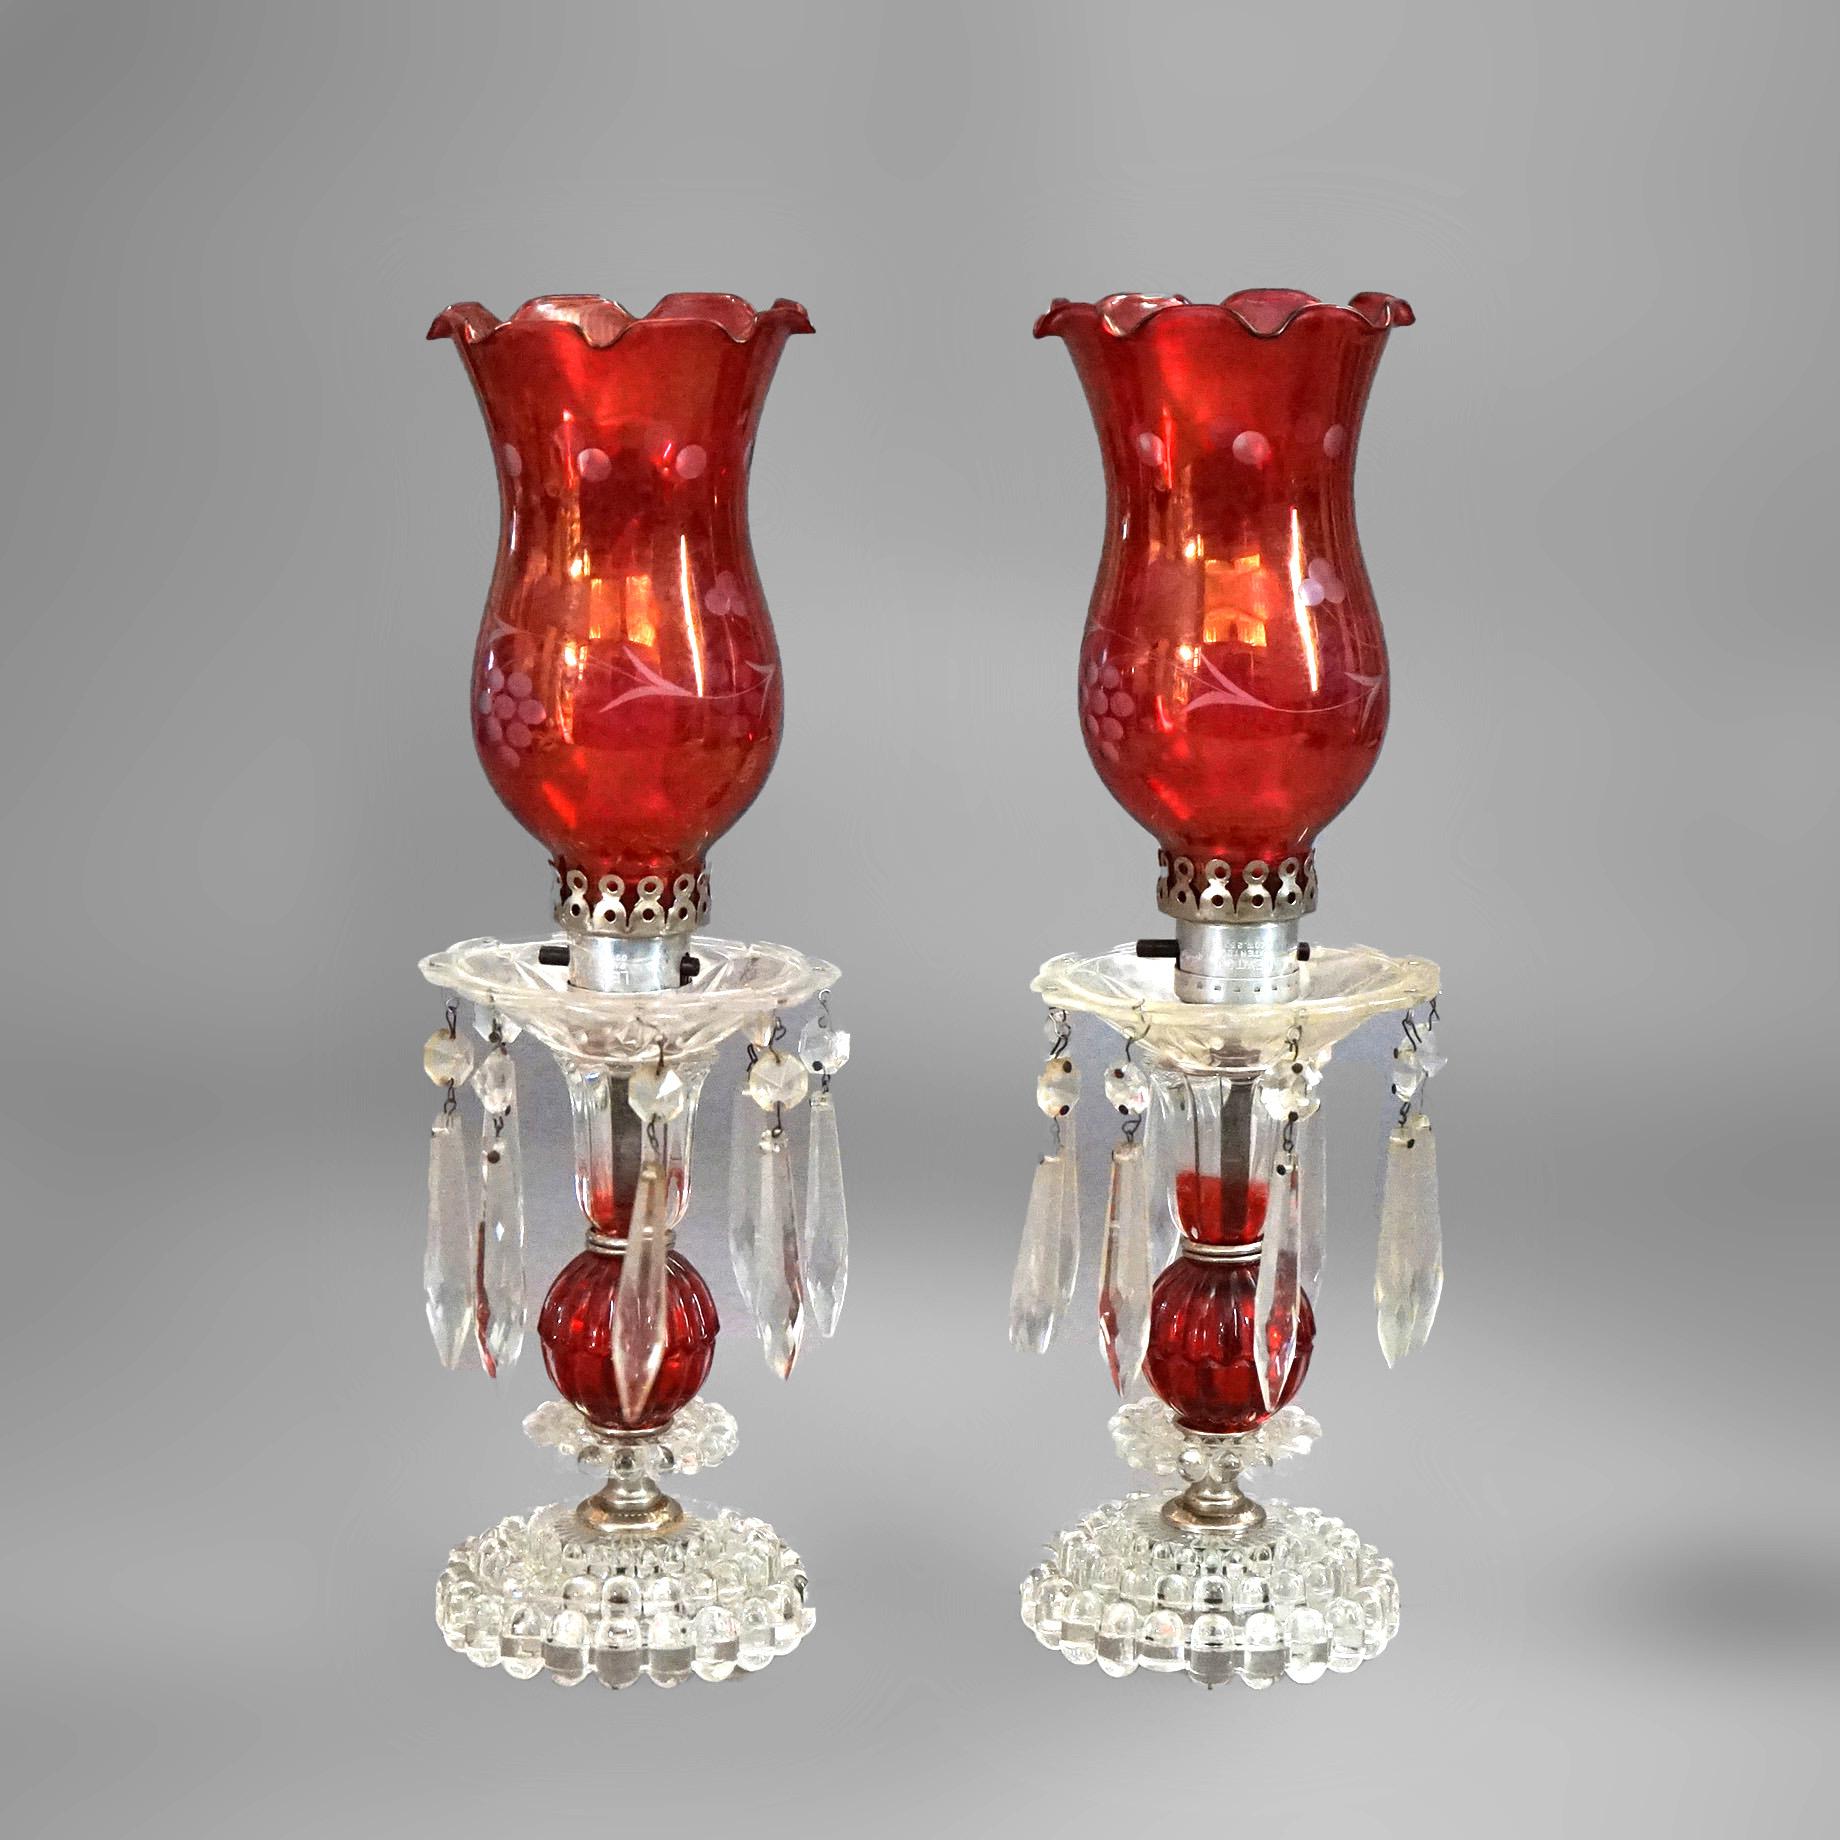 An antique pair of buffet lamps offers cranberry and colorless glass construction with etched shades and hanging crystals, c1940

Measure - 15